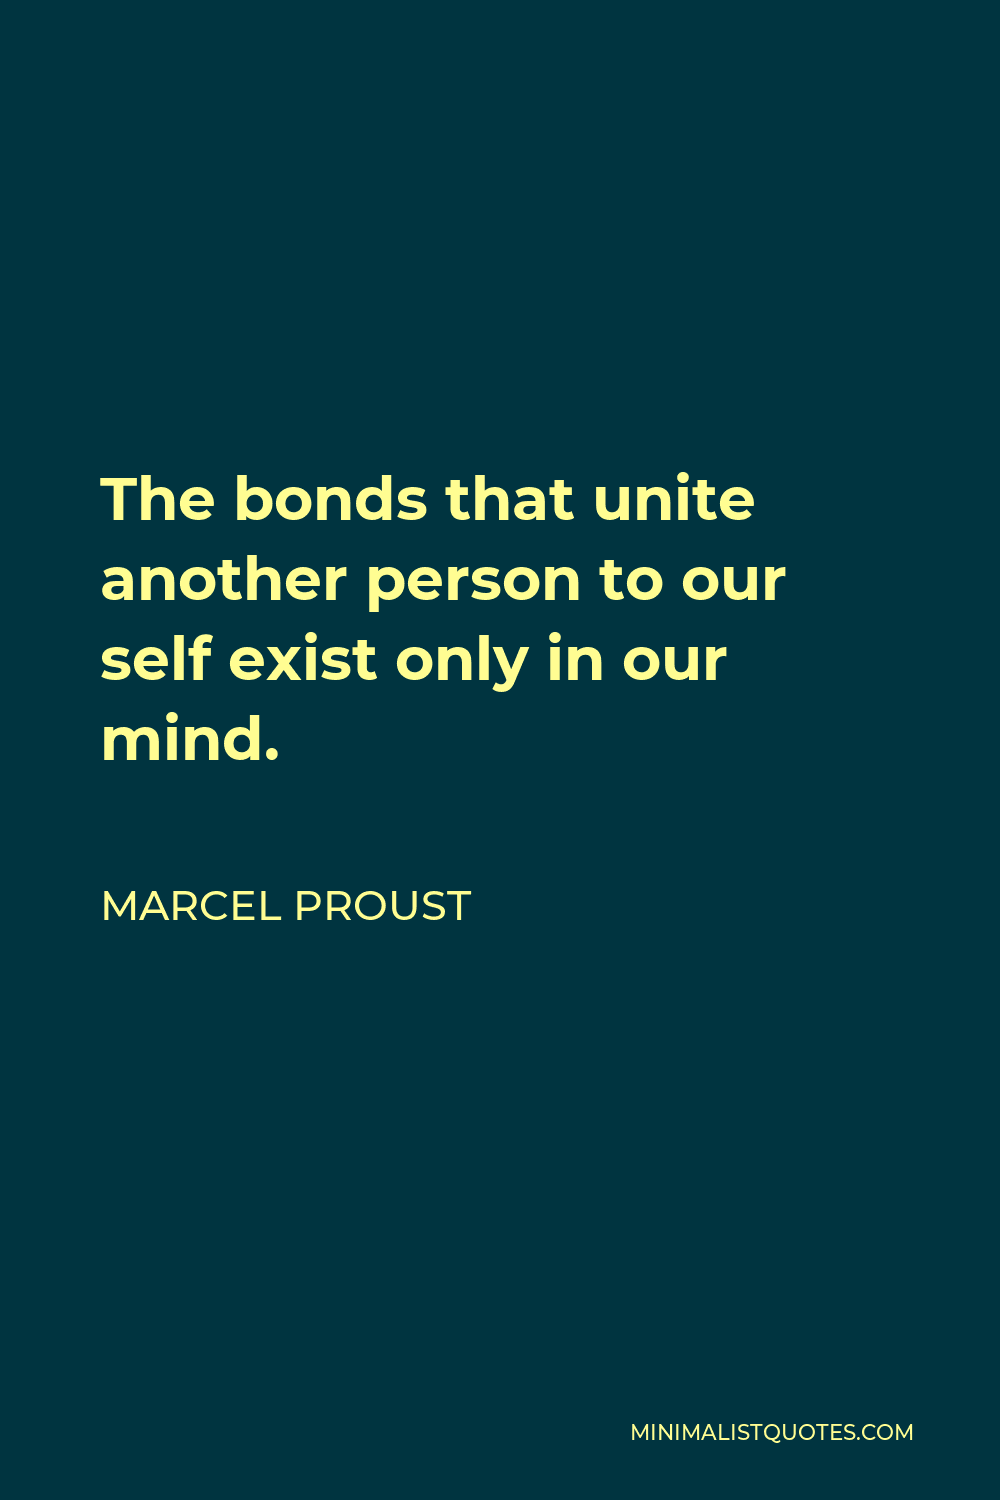 Marcel Proust Quote - The bonds that unite another person to our self exist only in our mind.